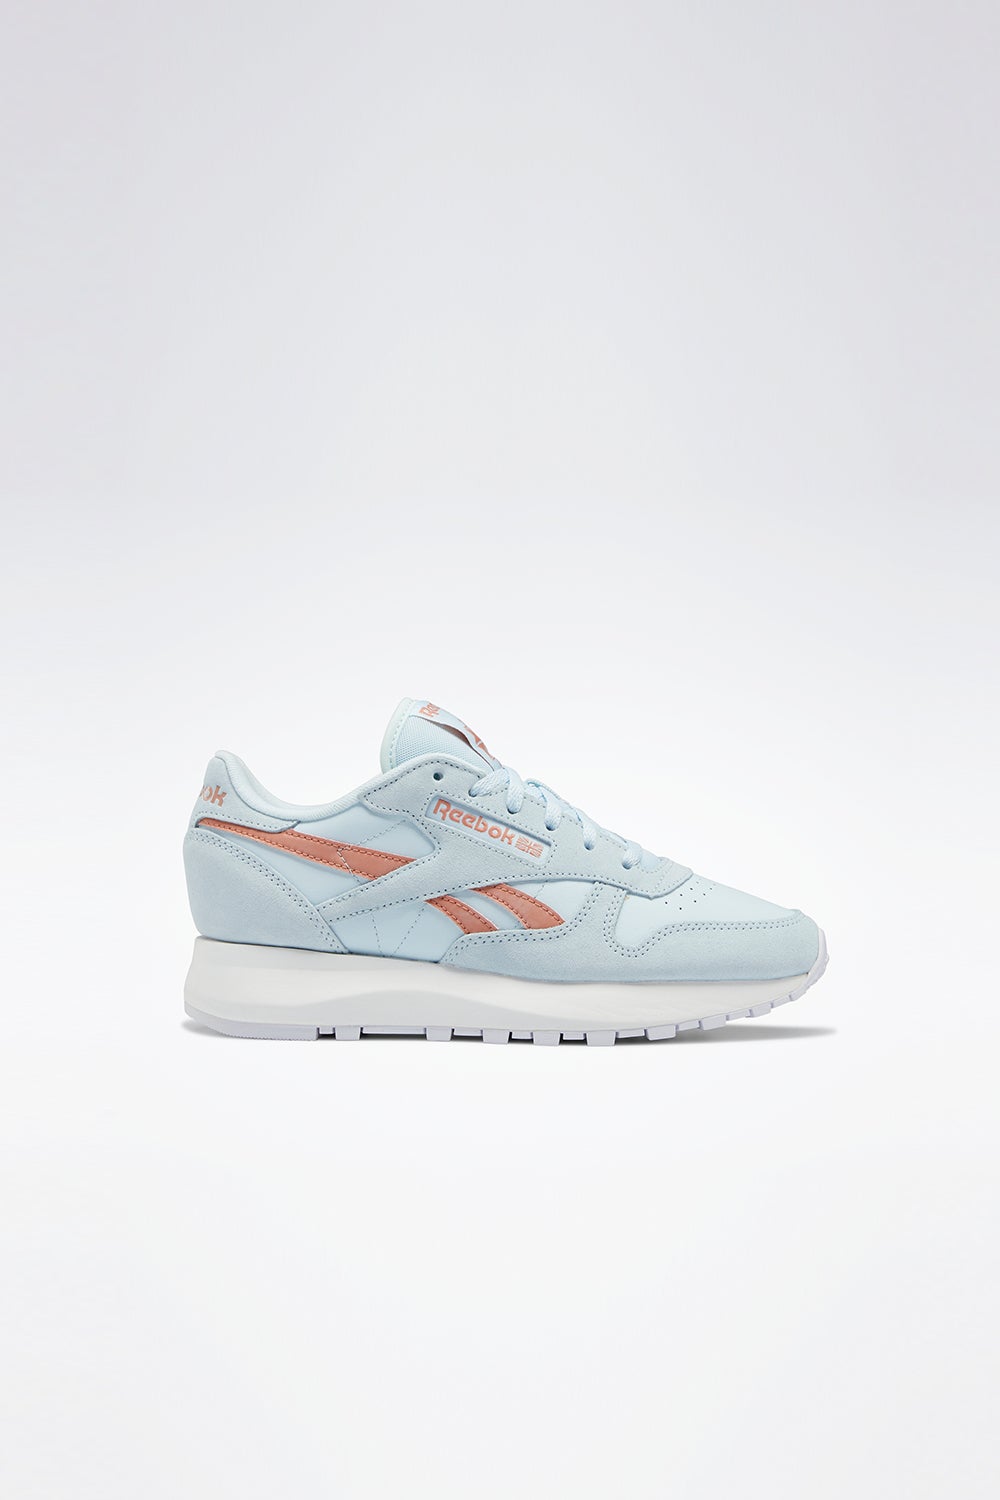 Reebok Classic Leather Sweetpea Shoes Glass Blue/Canyon Coral